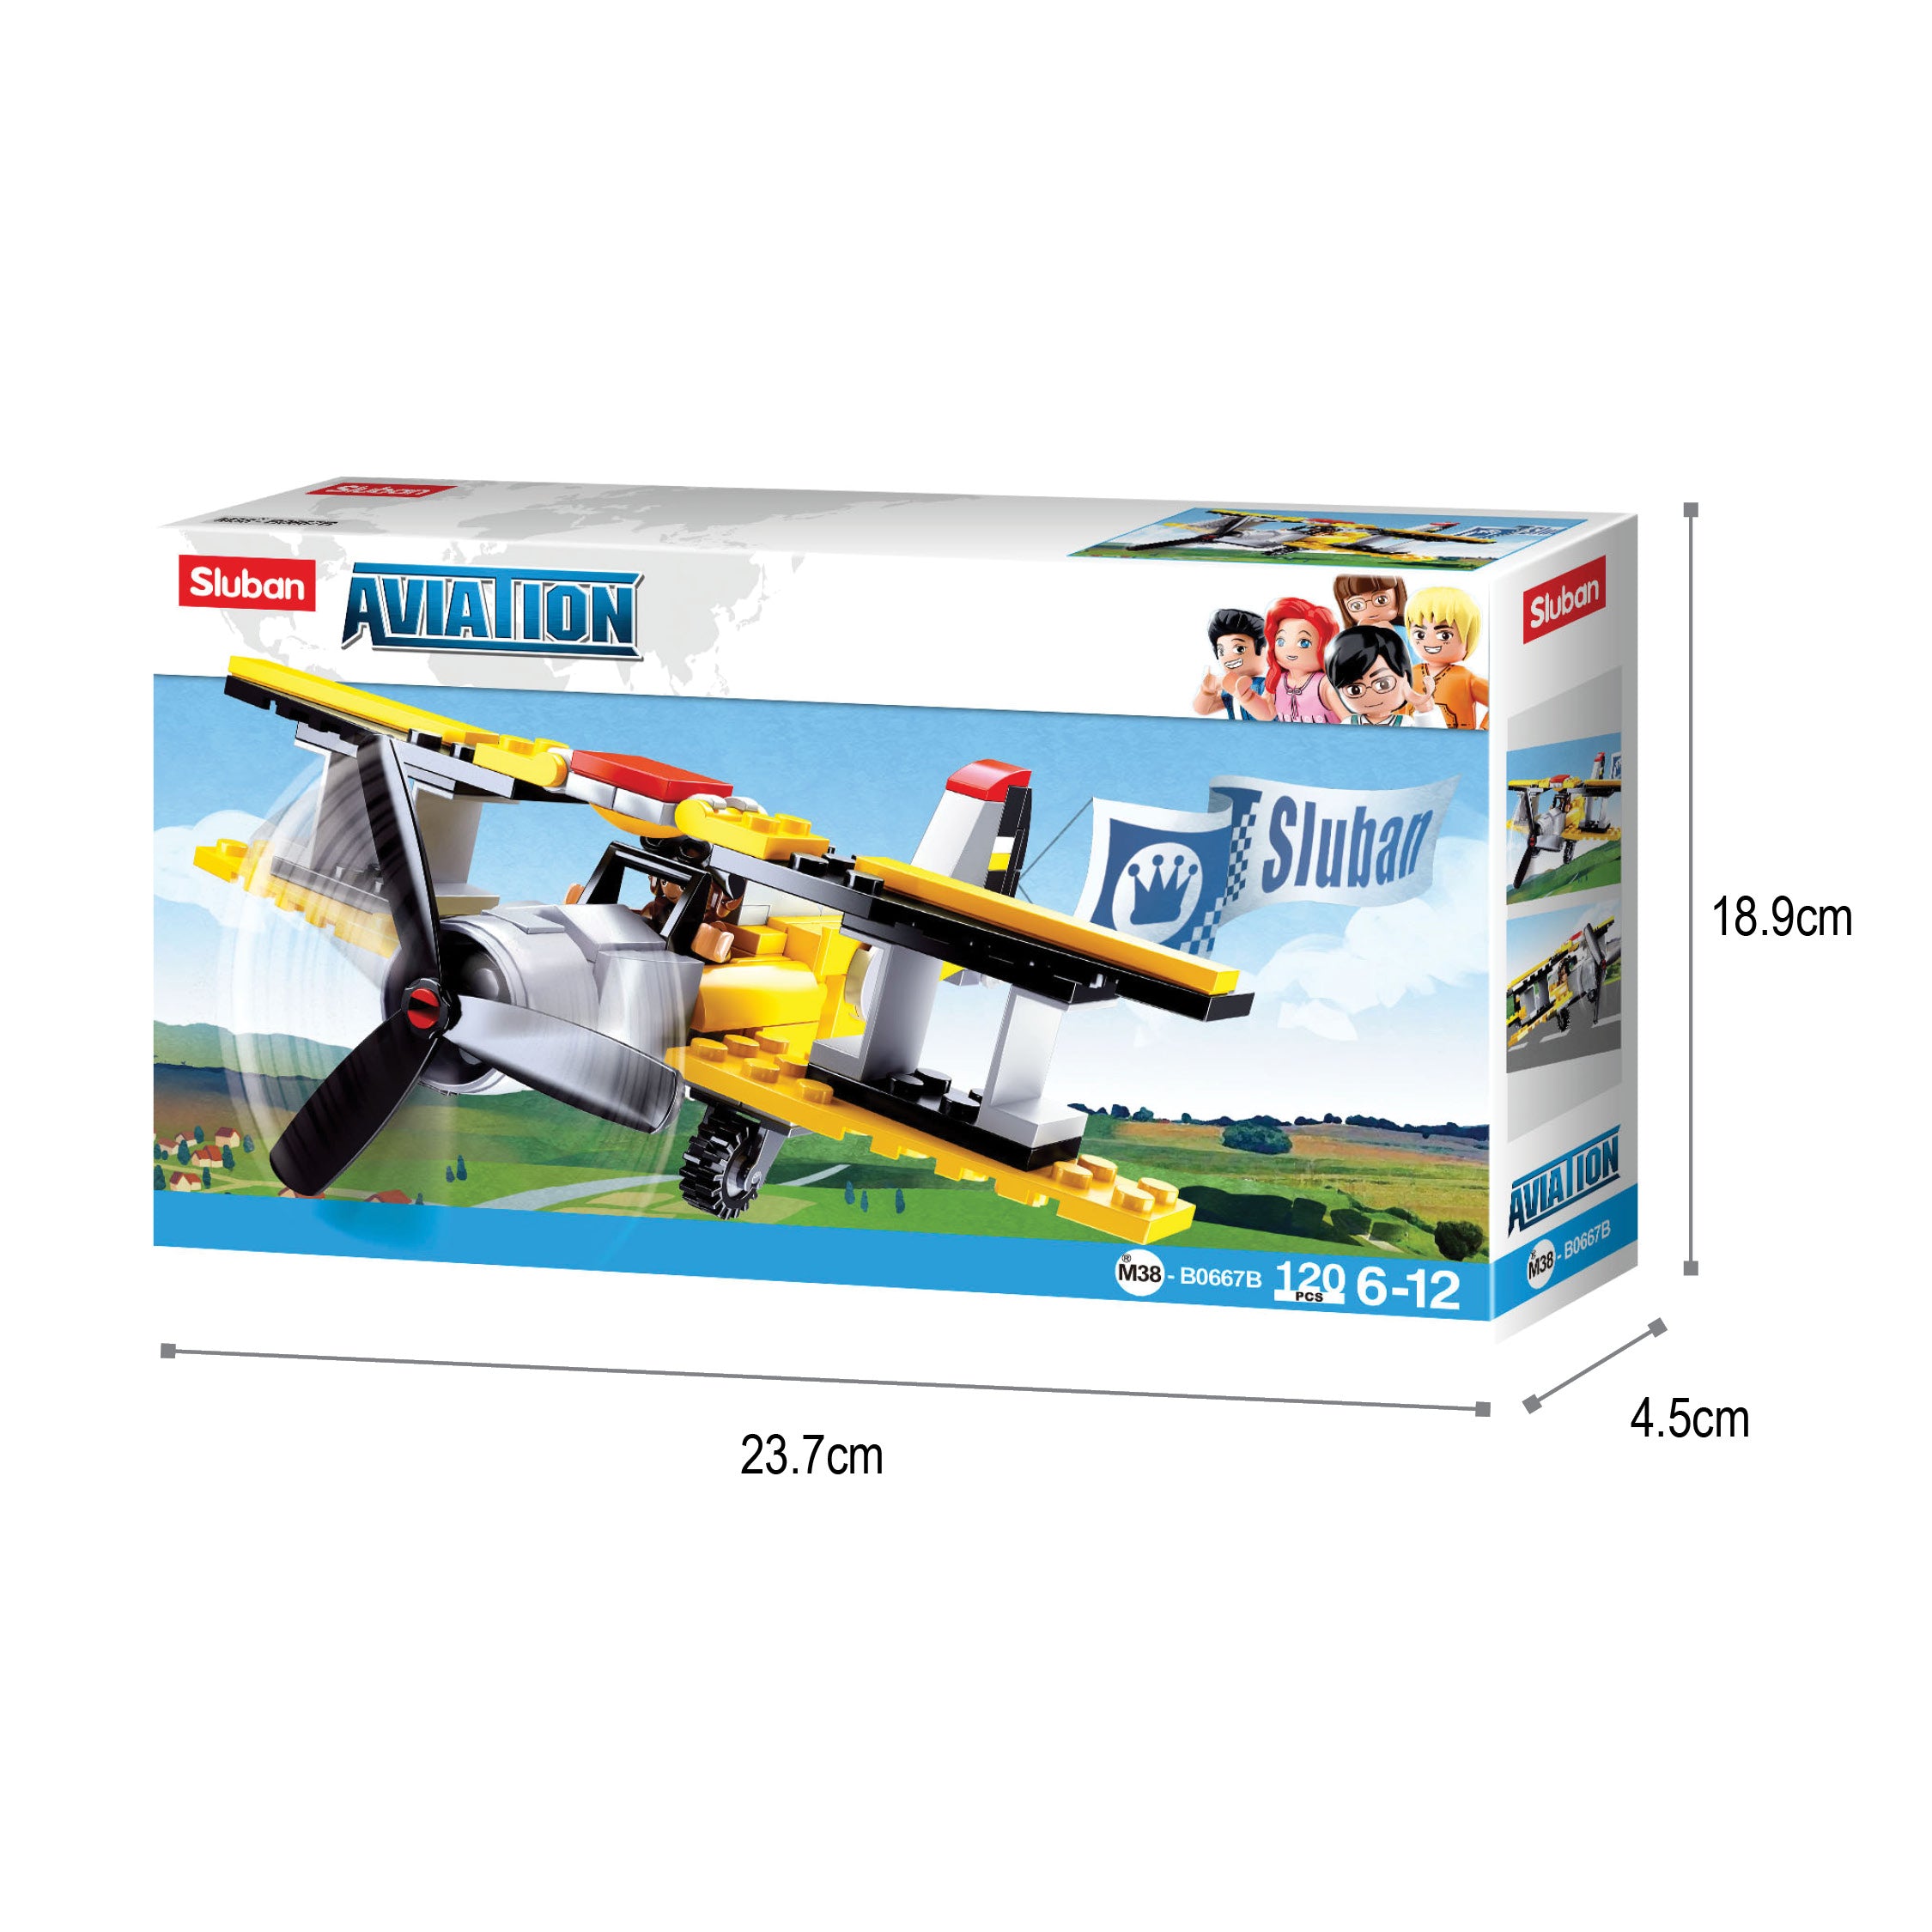 Sluban®  Aviation Iii - Plane (M38-B0667B) (120 Pieces) Building Blocks Kit For Boys And Girls Aged 6 Years And Above Creative  Construction Set Educational Stem Toy Blocks Compatible With Other Leading Brands, Bis Certified.